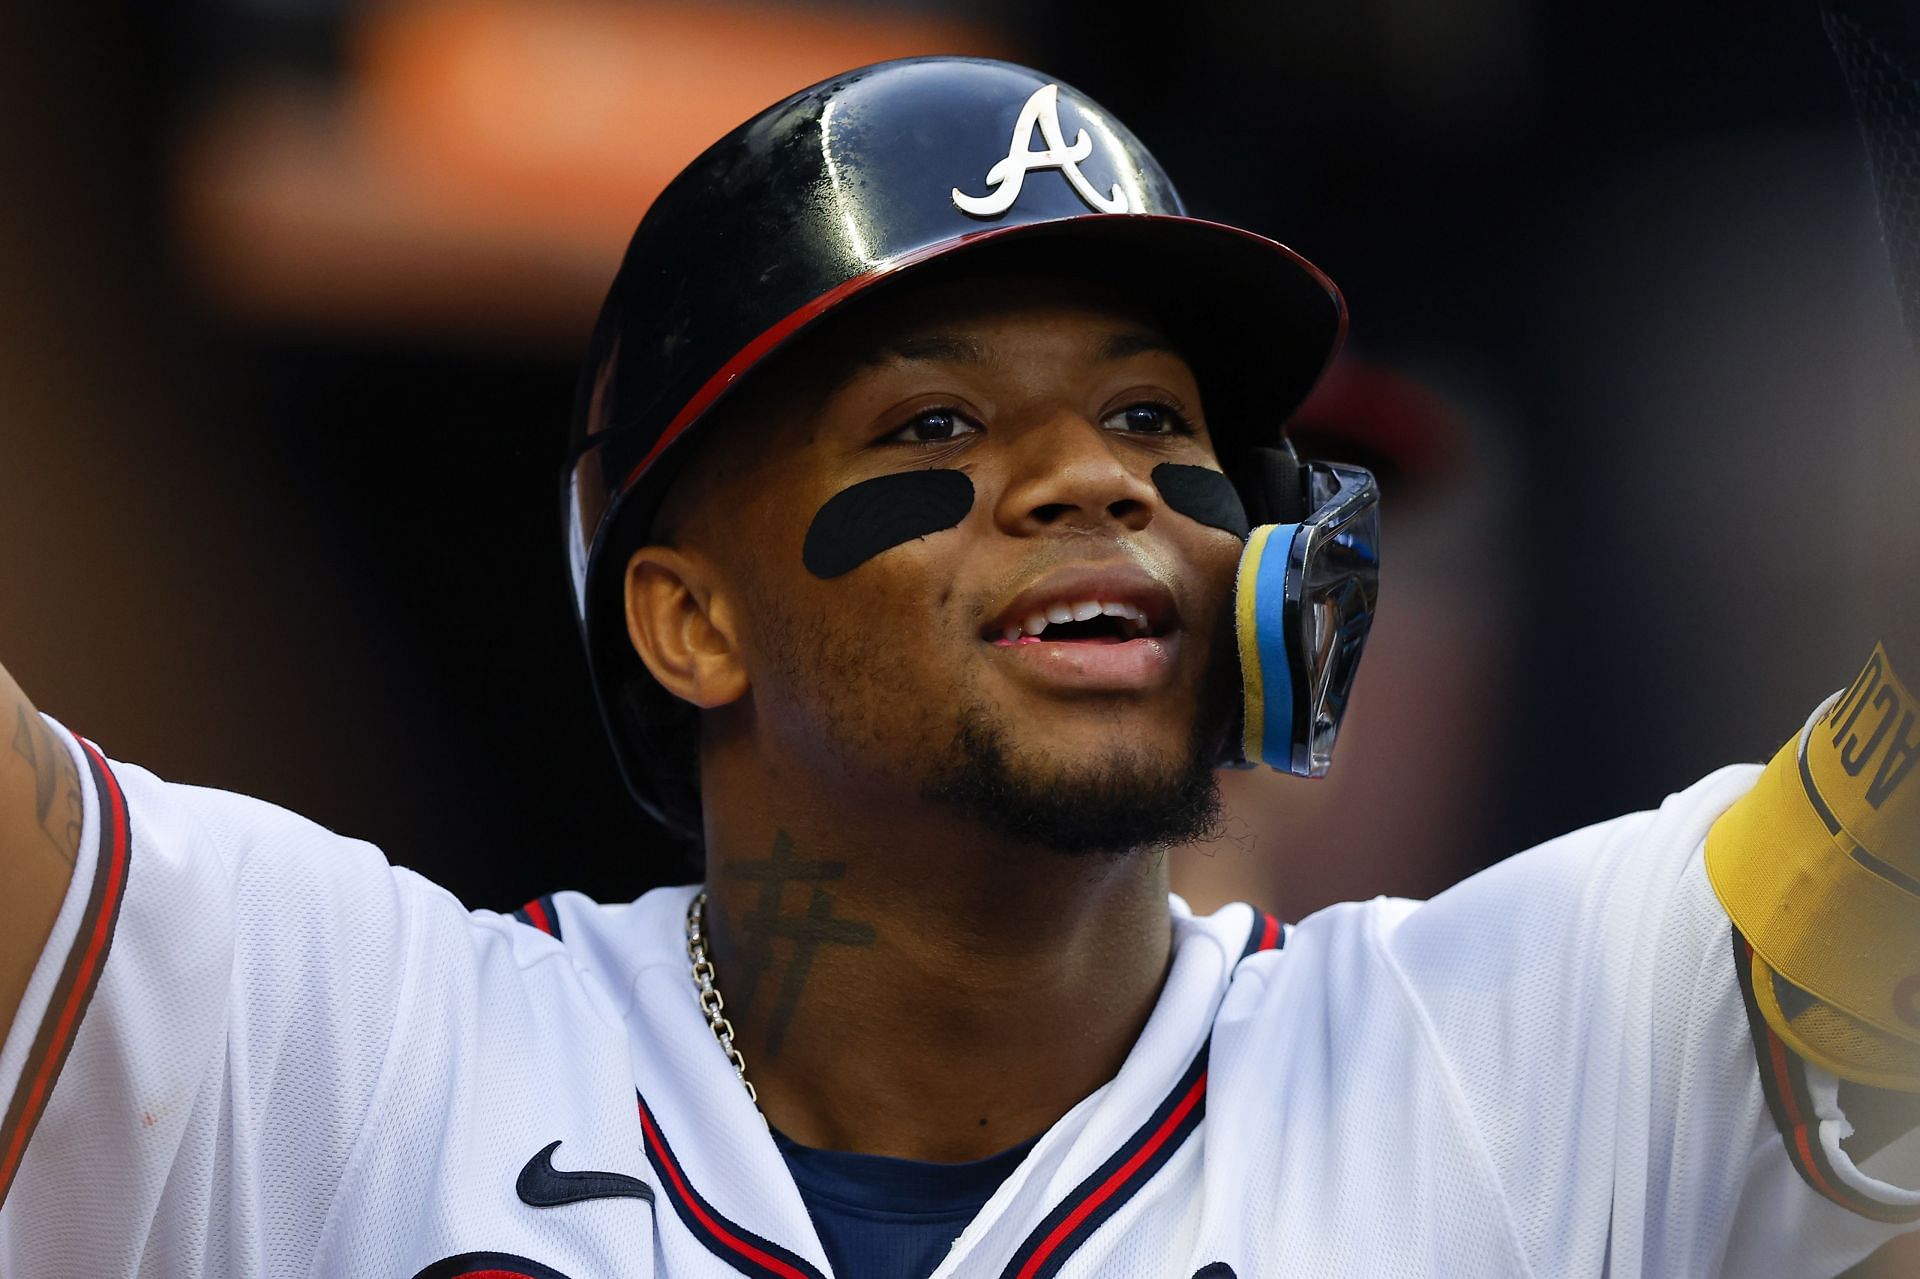 Braves' Ronald Acuna Jr.'s Foot Injury Not Expected to Be Serious